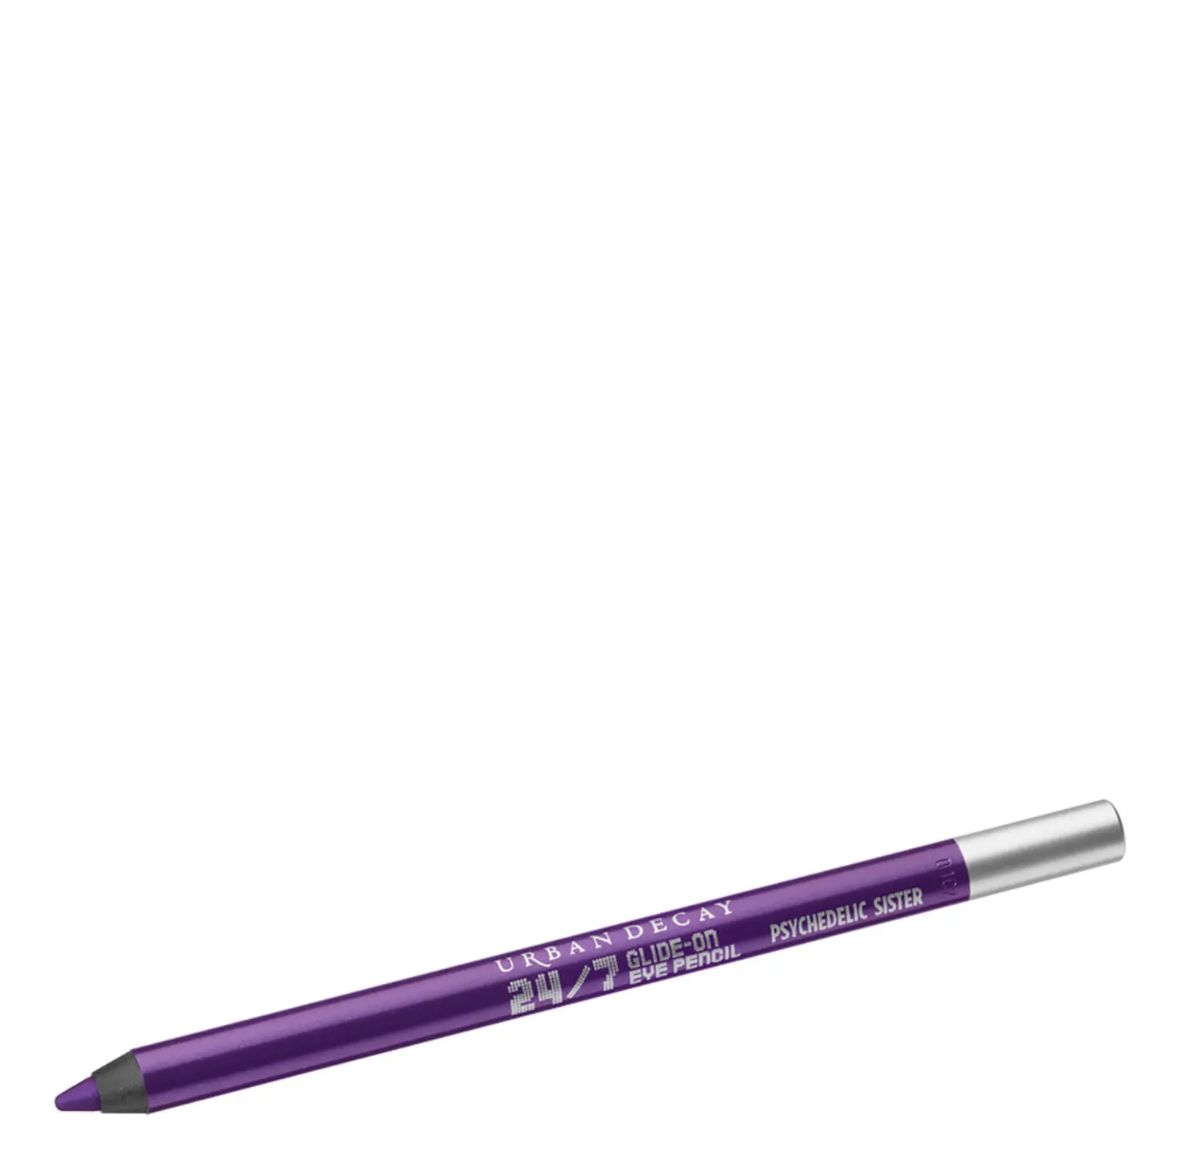 Urban Decay 24/7 Glide On Eye Pencil in Psychedelic Sister